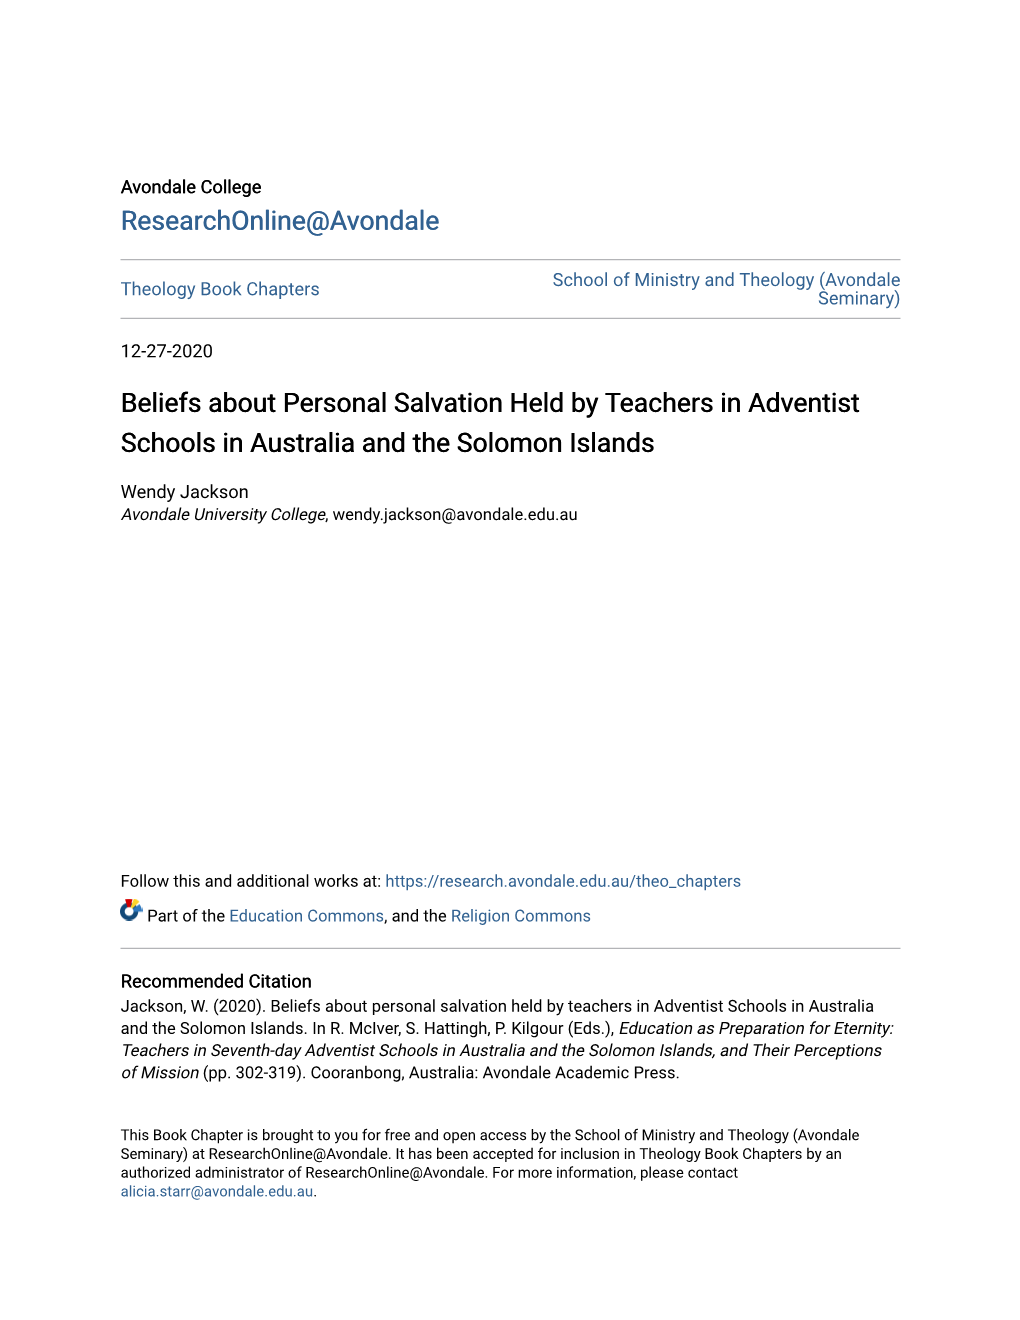 Beliefs About Personal Salvation Held by Teachers in Adventist Schools in Australia and the Solomon Islands